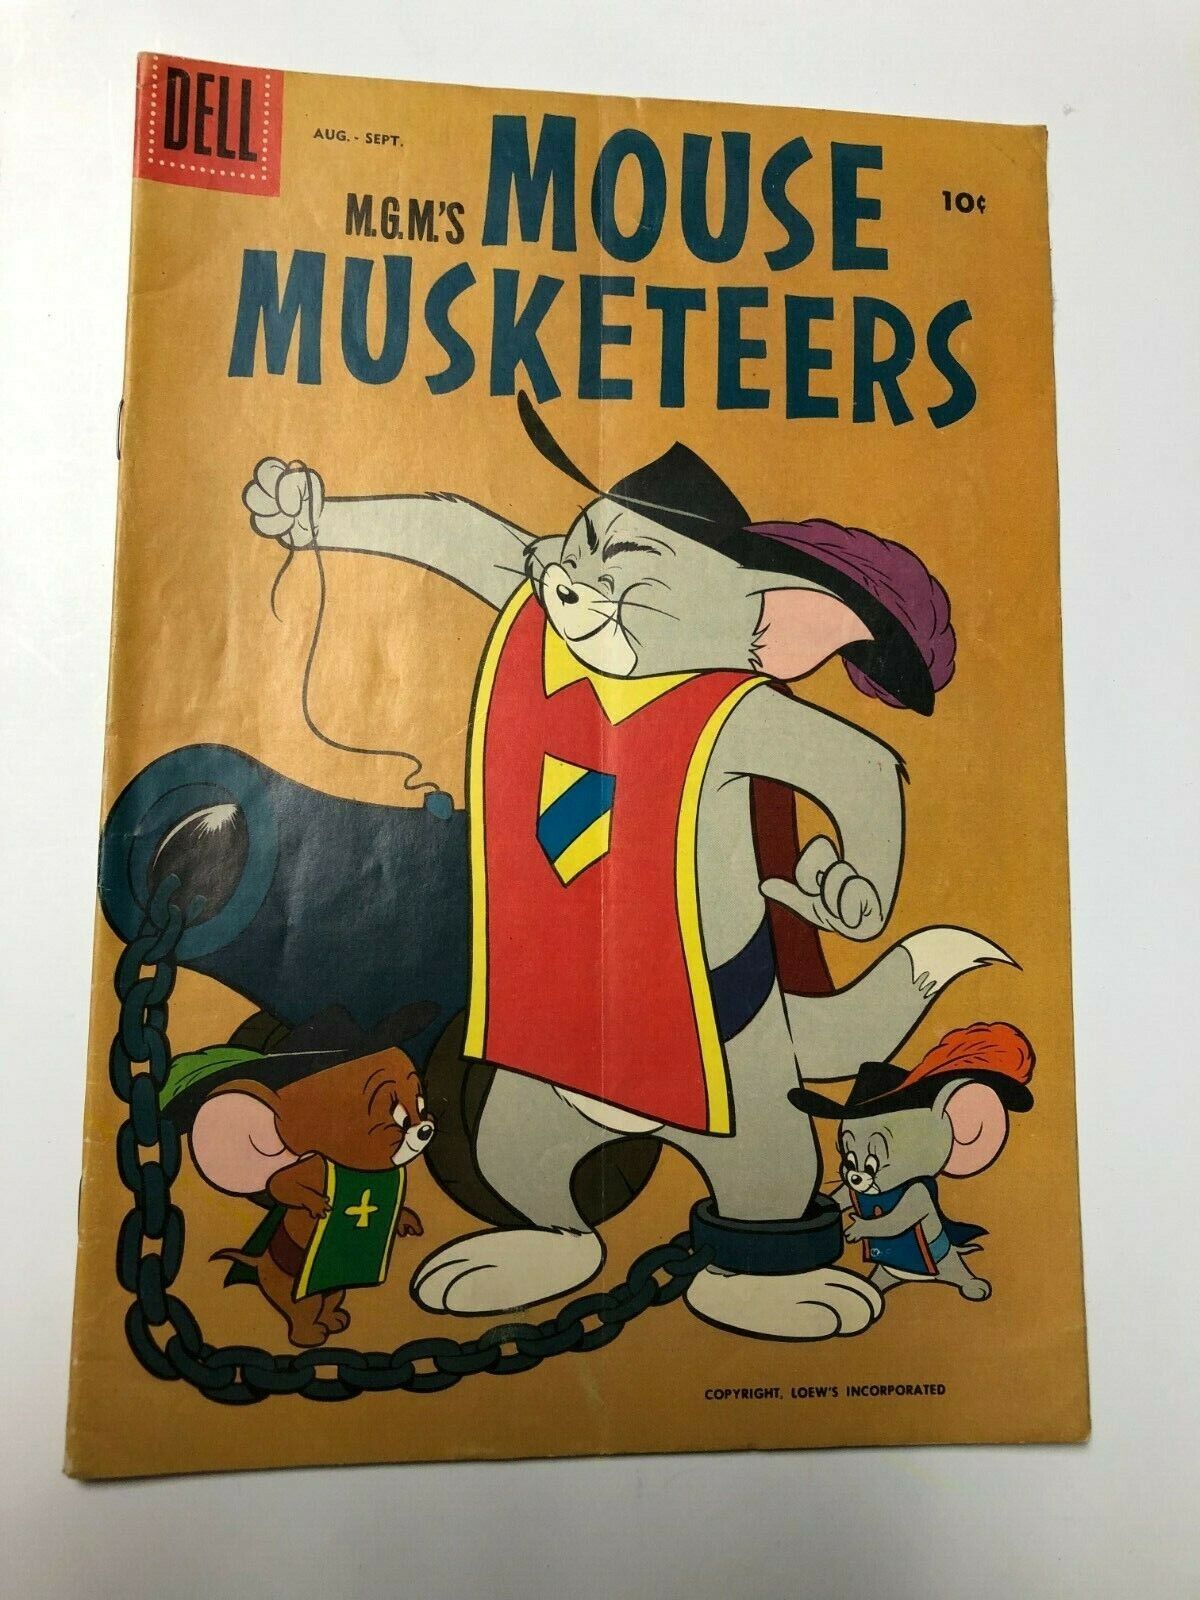 MGM's Mouse Musketeers Comic #14 Aug/Sept., 1958 Dell